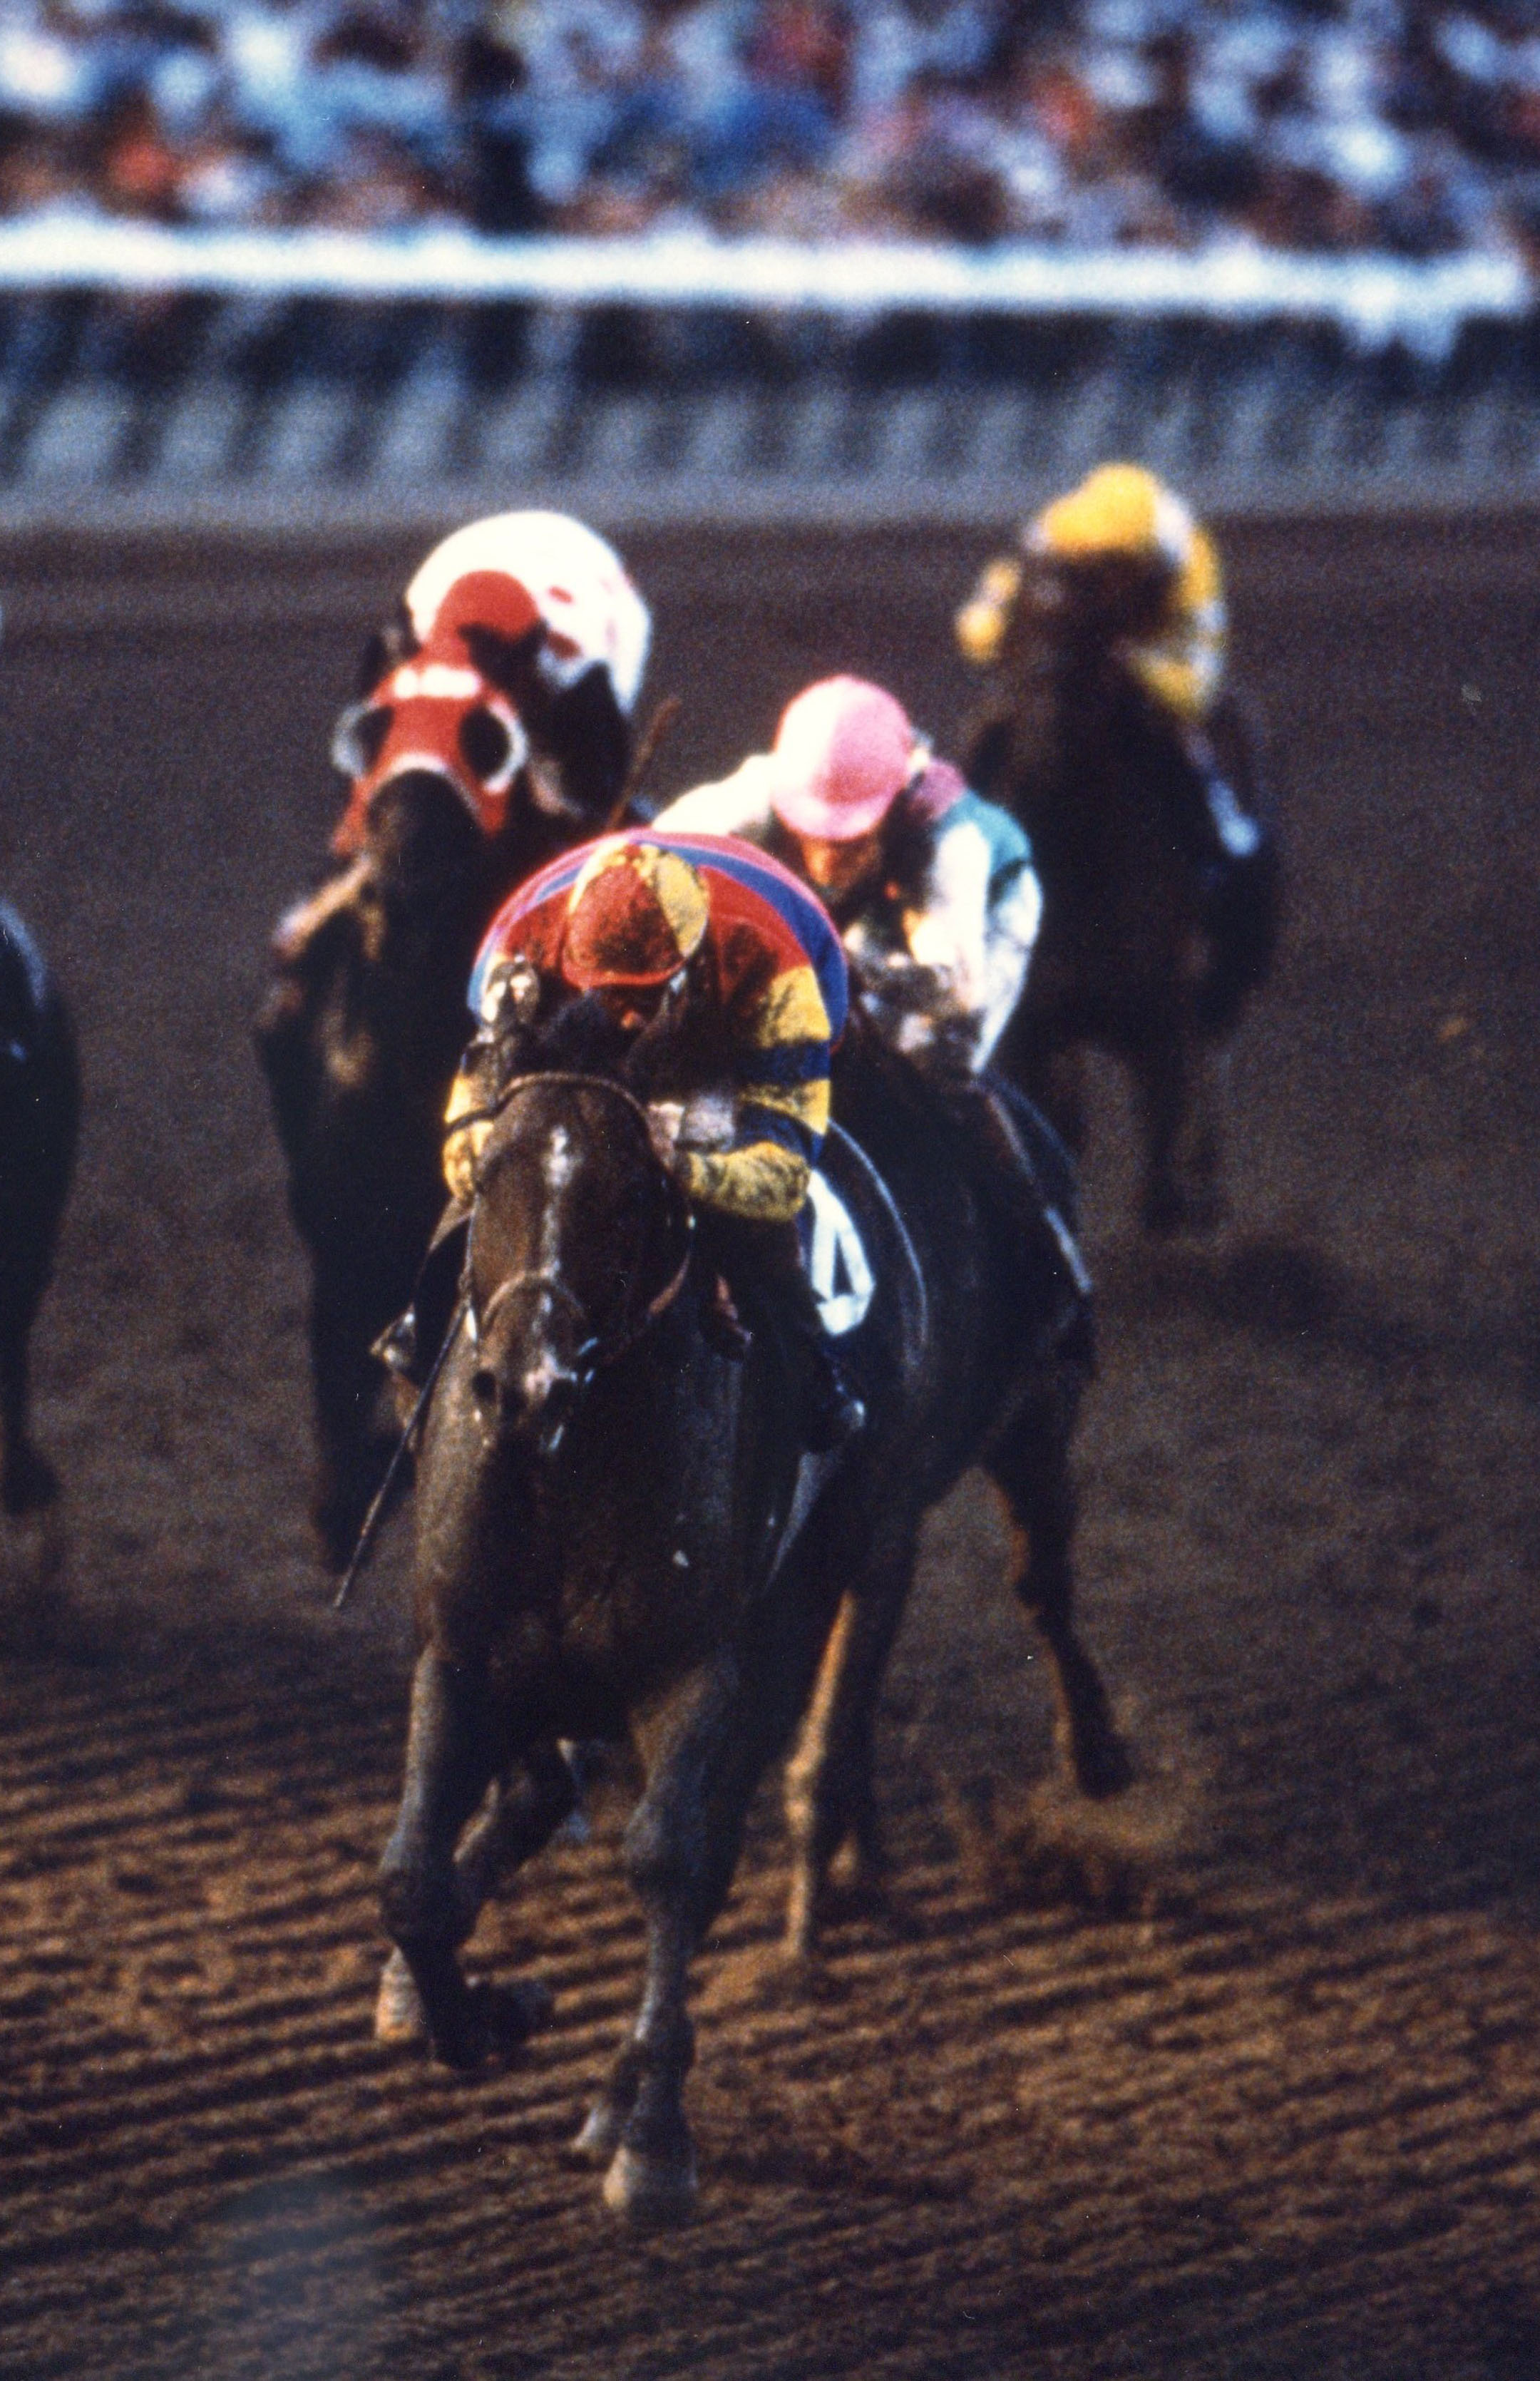 A.P. Indy (Eddie Delahoussaye up) turning for home in the 1992 Breeders' Cup Classic at Gulfstream Park (Breeders' Cup Photo/Museum Collection)